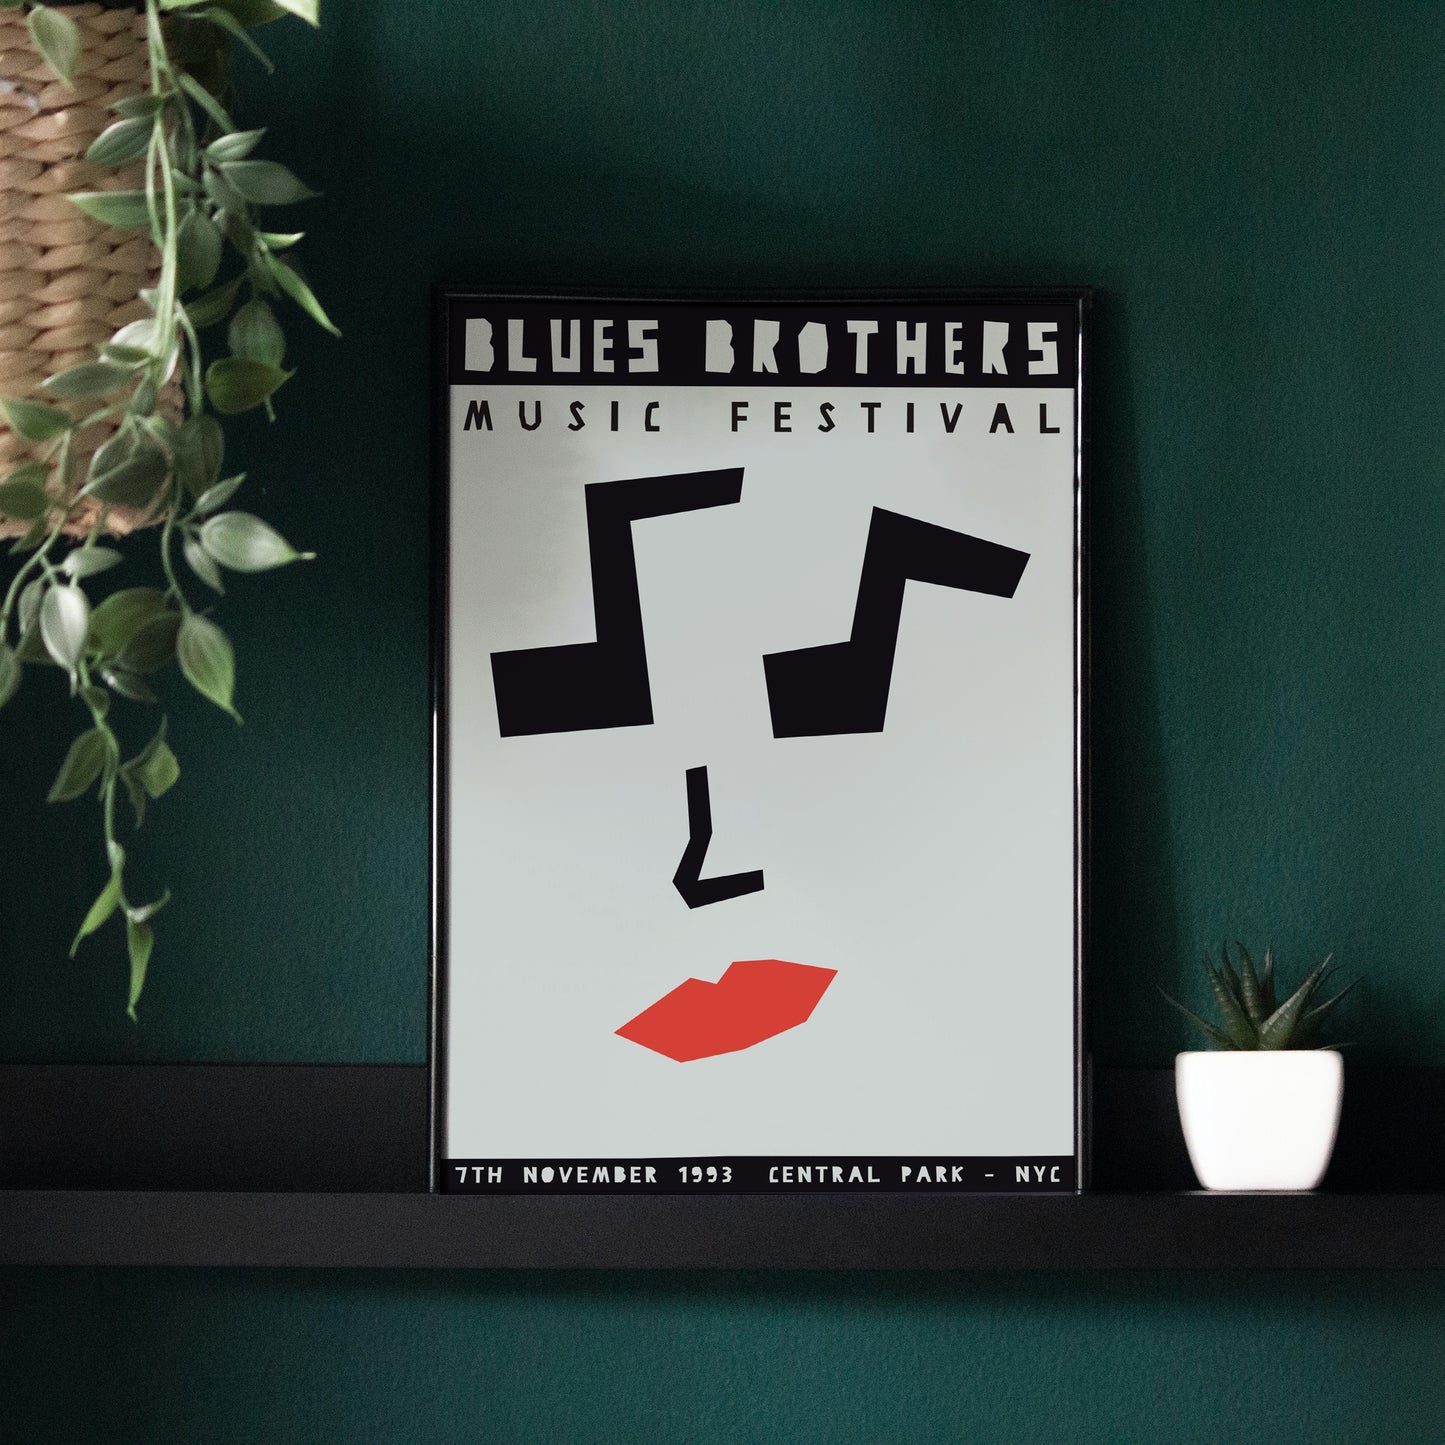 Blues Brothers Jazz Festival Poster